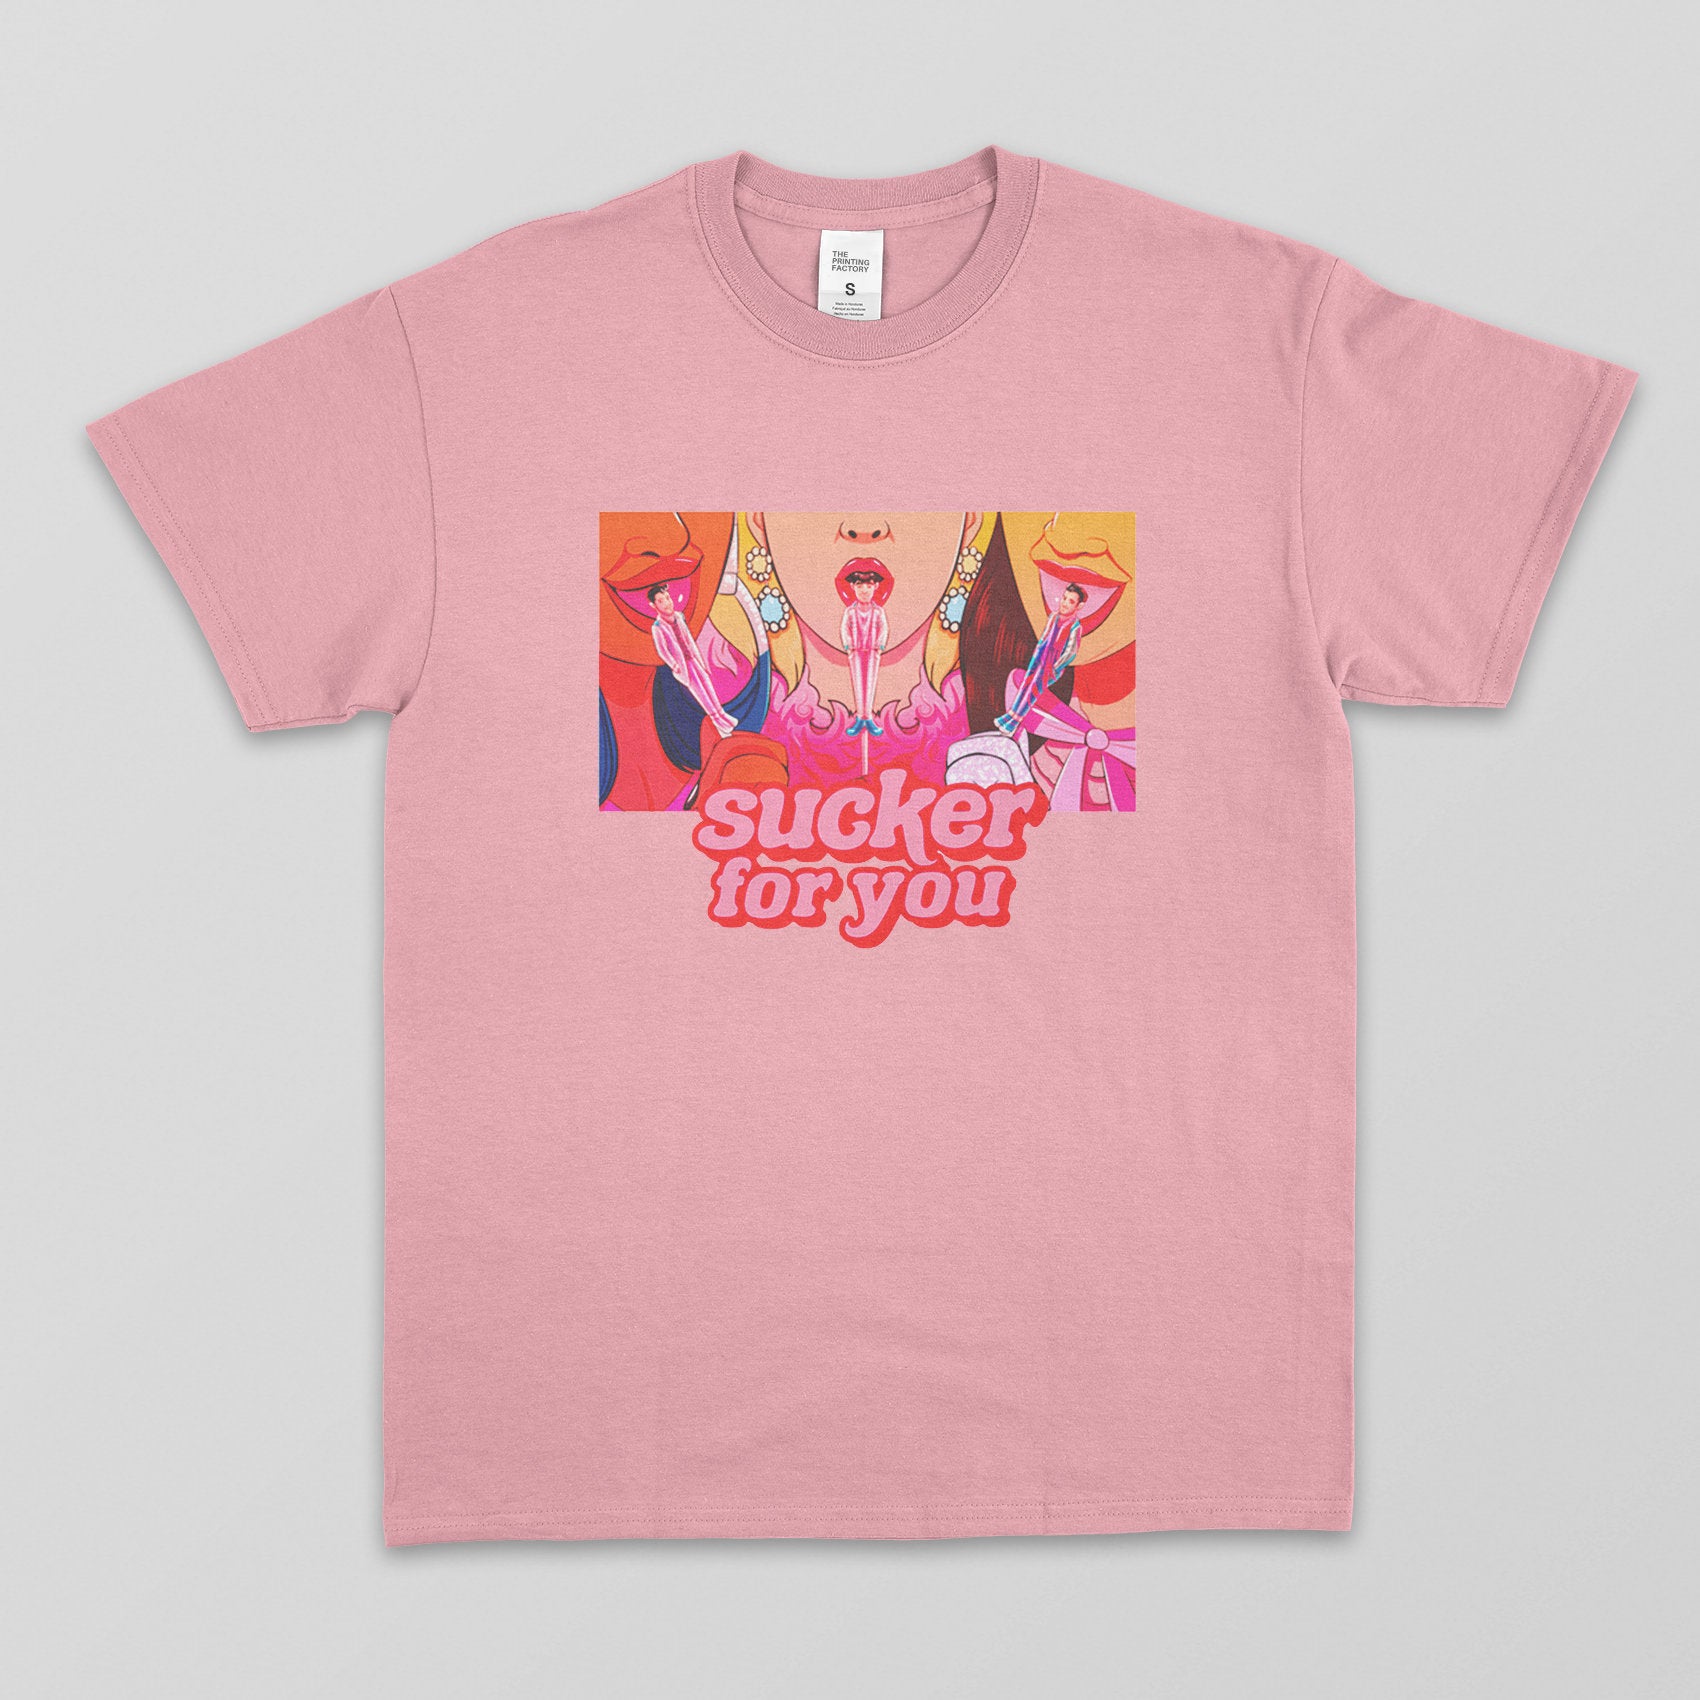 Sucker for You Jonas Brothers Inspired T-shirt